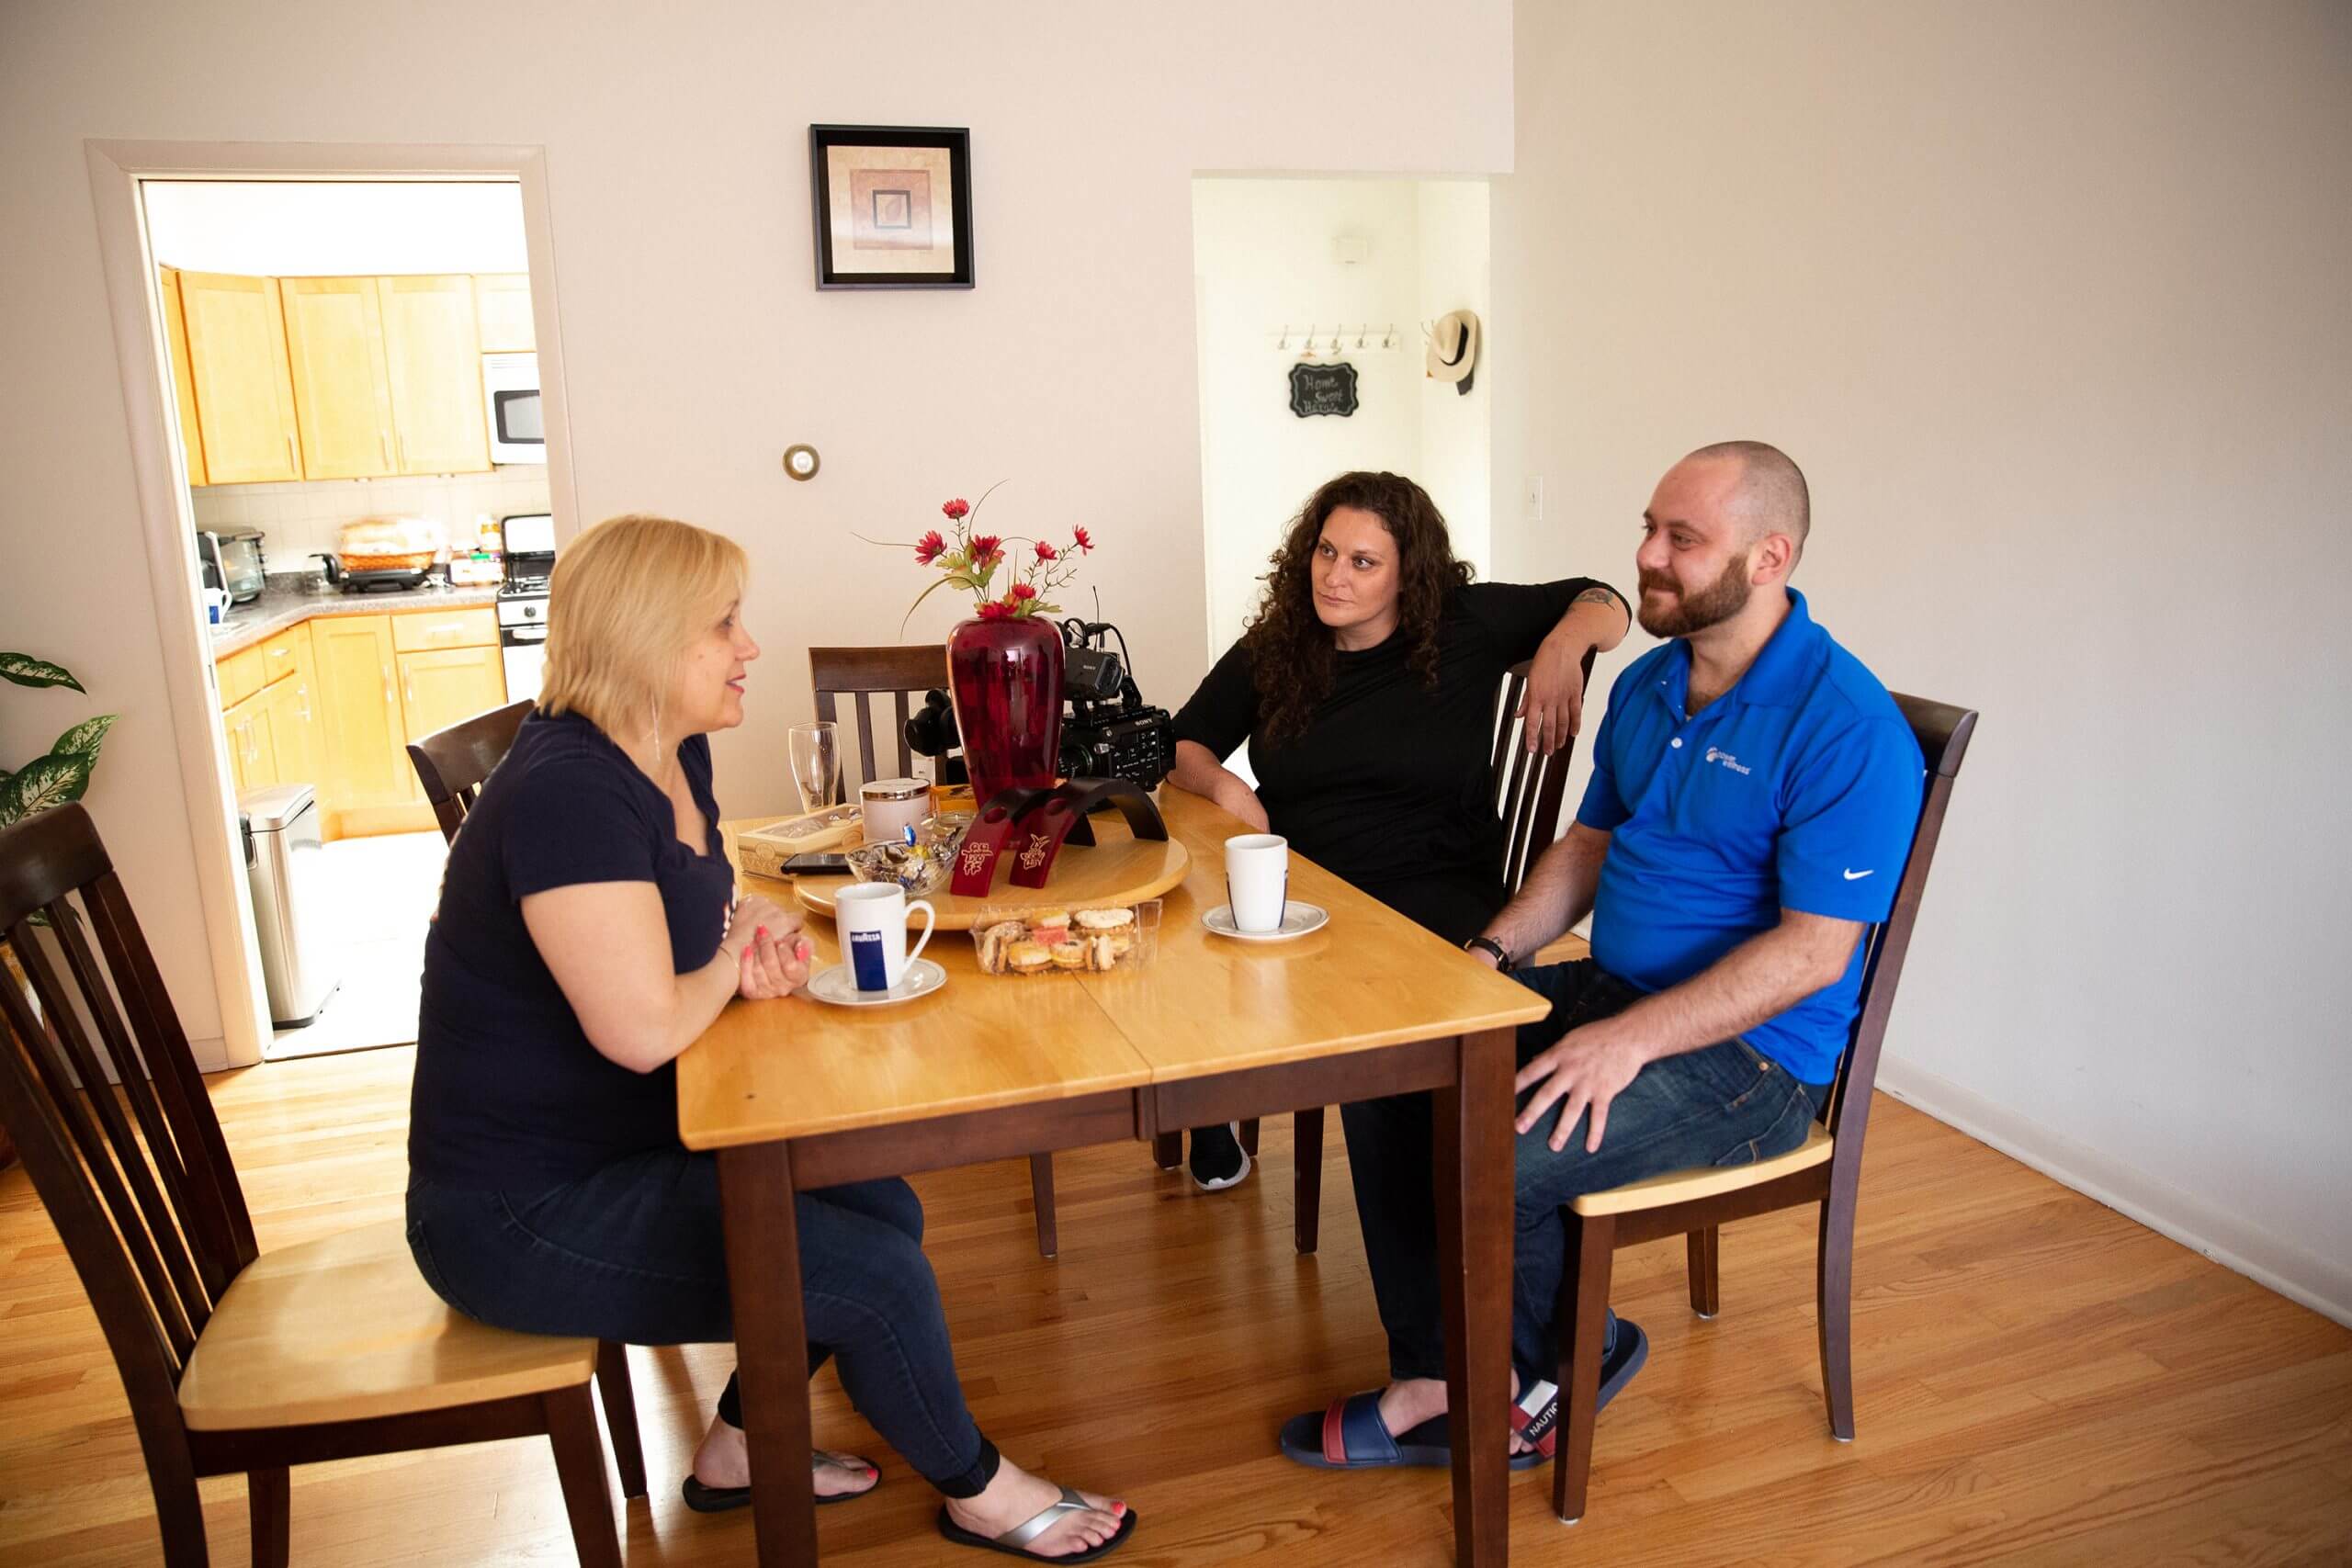 Three people are sat in a dining room during the day. On the left thee is a woman with short blond hair and wearing black t-shirt and pants, in front of her there are a woman with long hair and black long sleeve shirt, and a man with beard and a blue polo shirt, bot look at the blond woman. In the table there are cookies, coffee mugs, flowers in a vase and a camera. In the background you can see the entrance to a kitchen.